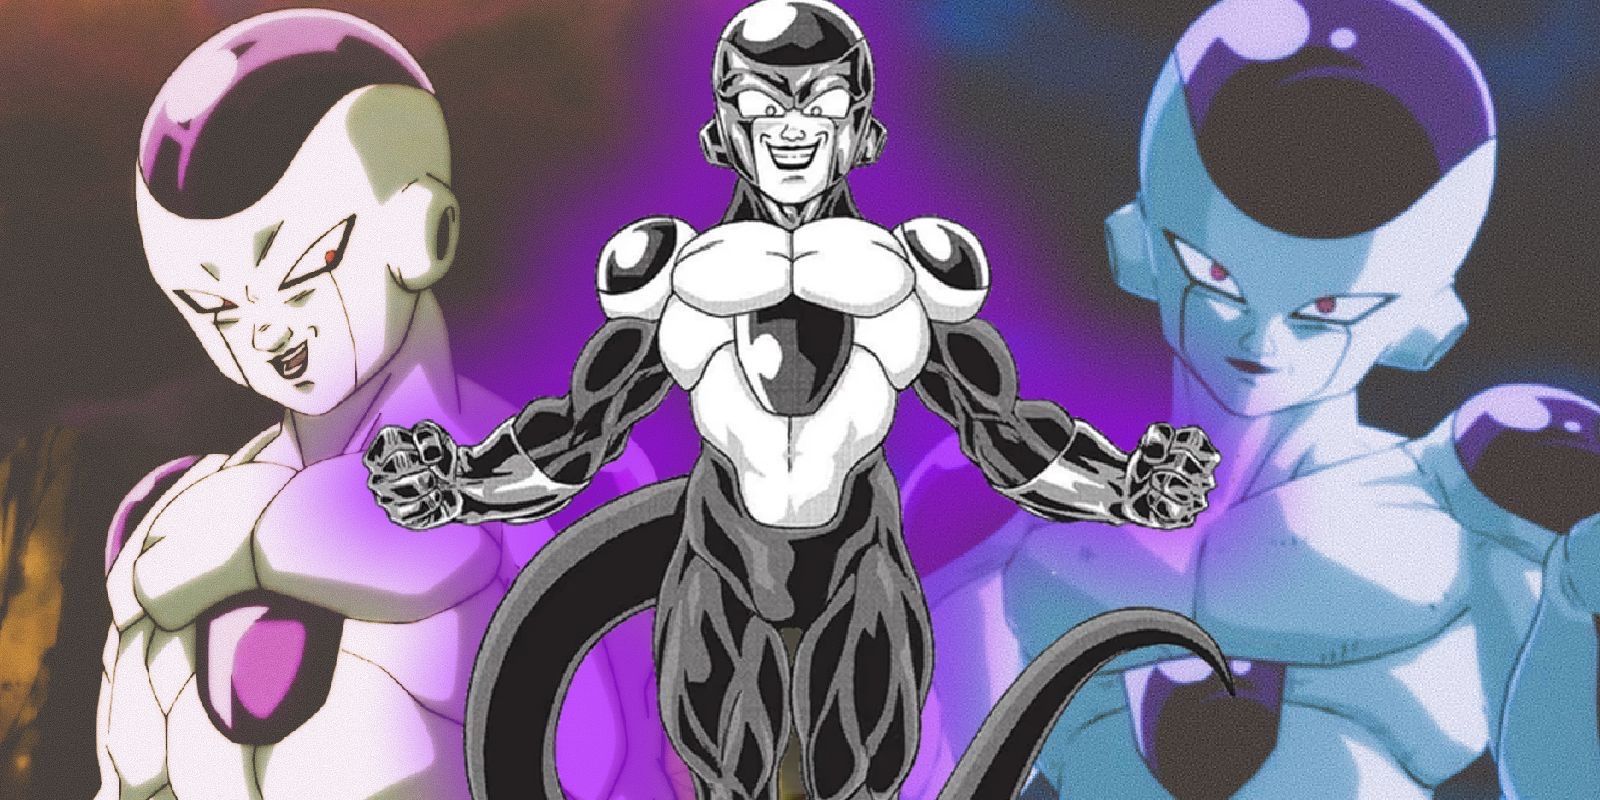 Black frieza from the Dragon Ball Super manga in front of his appearance in the anime and Tenkaichi Budokai game